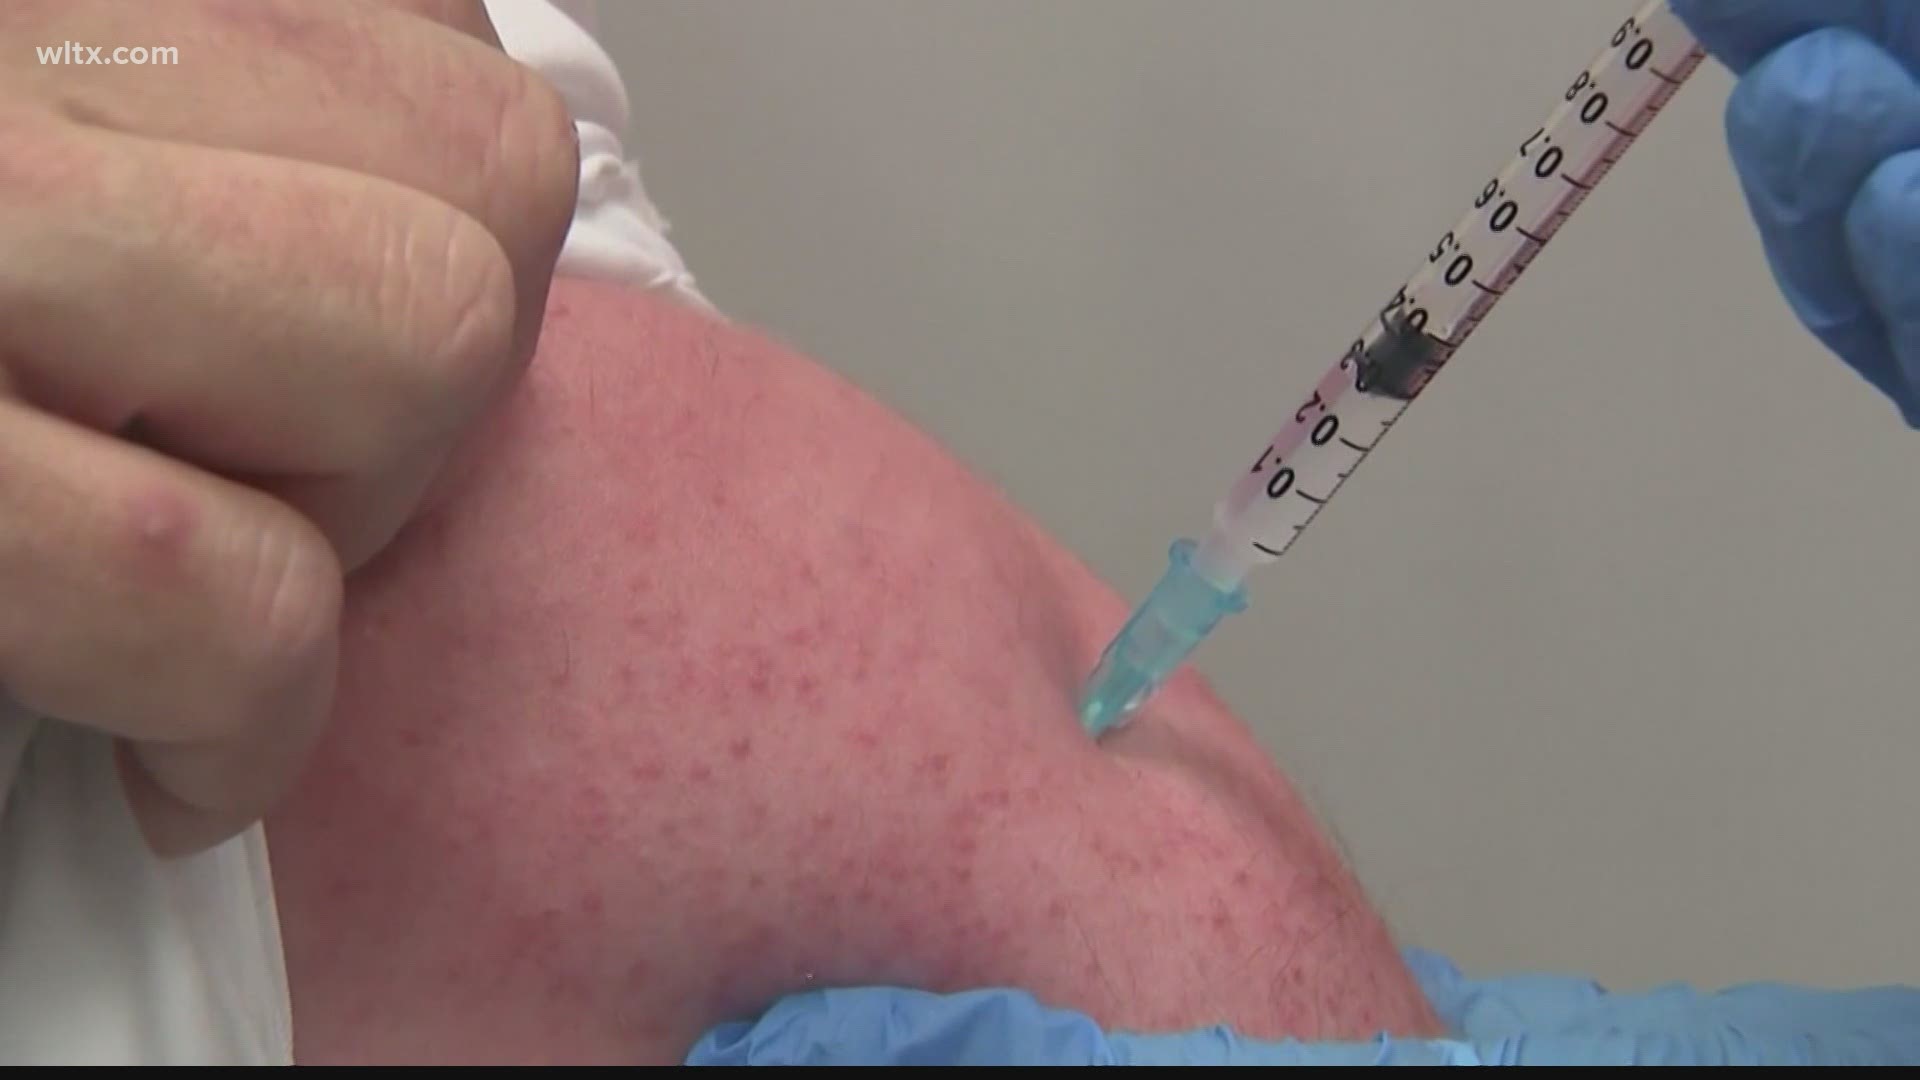 Doctors and healthcare providers are trying to get the word out that one shot just isn't enough to fight the coronavirus.